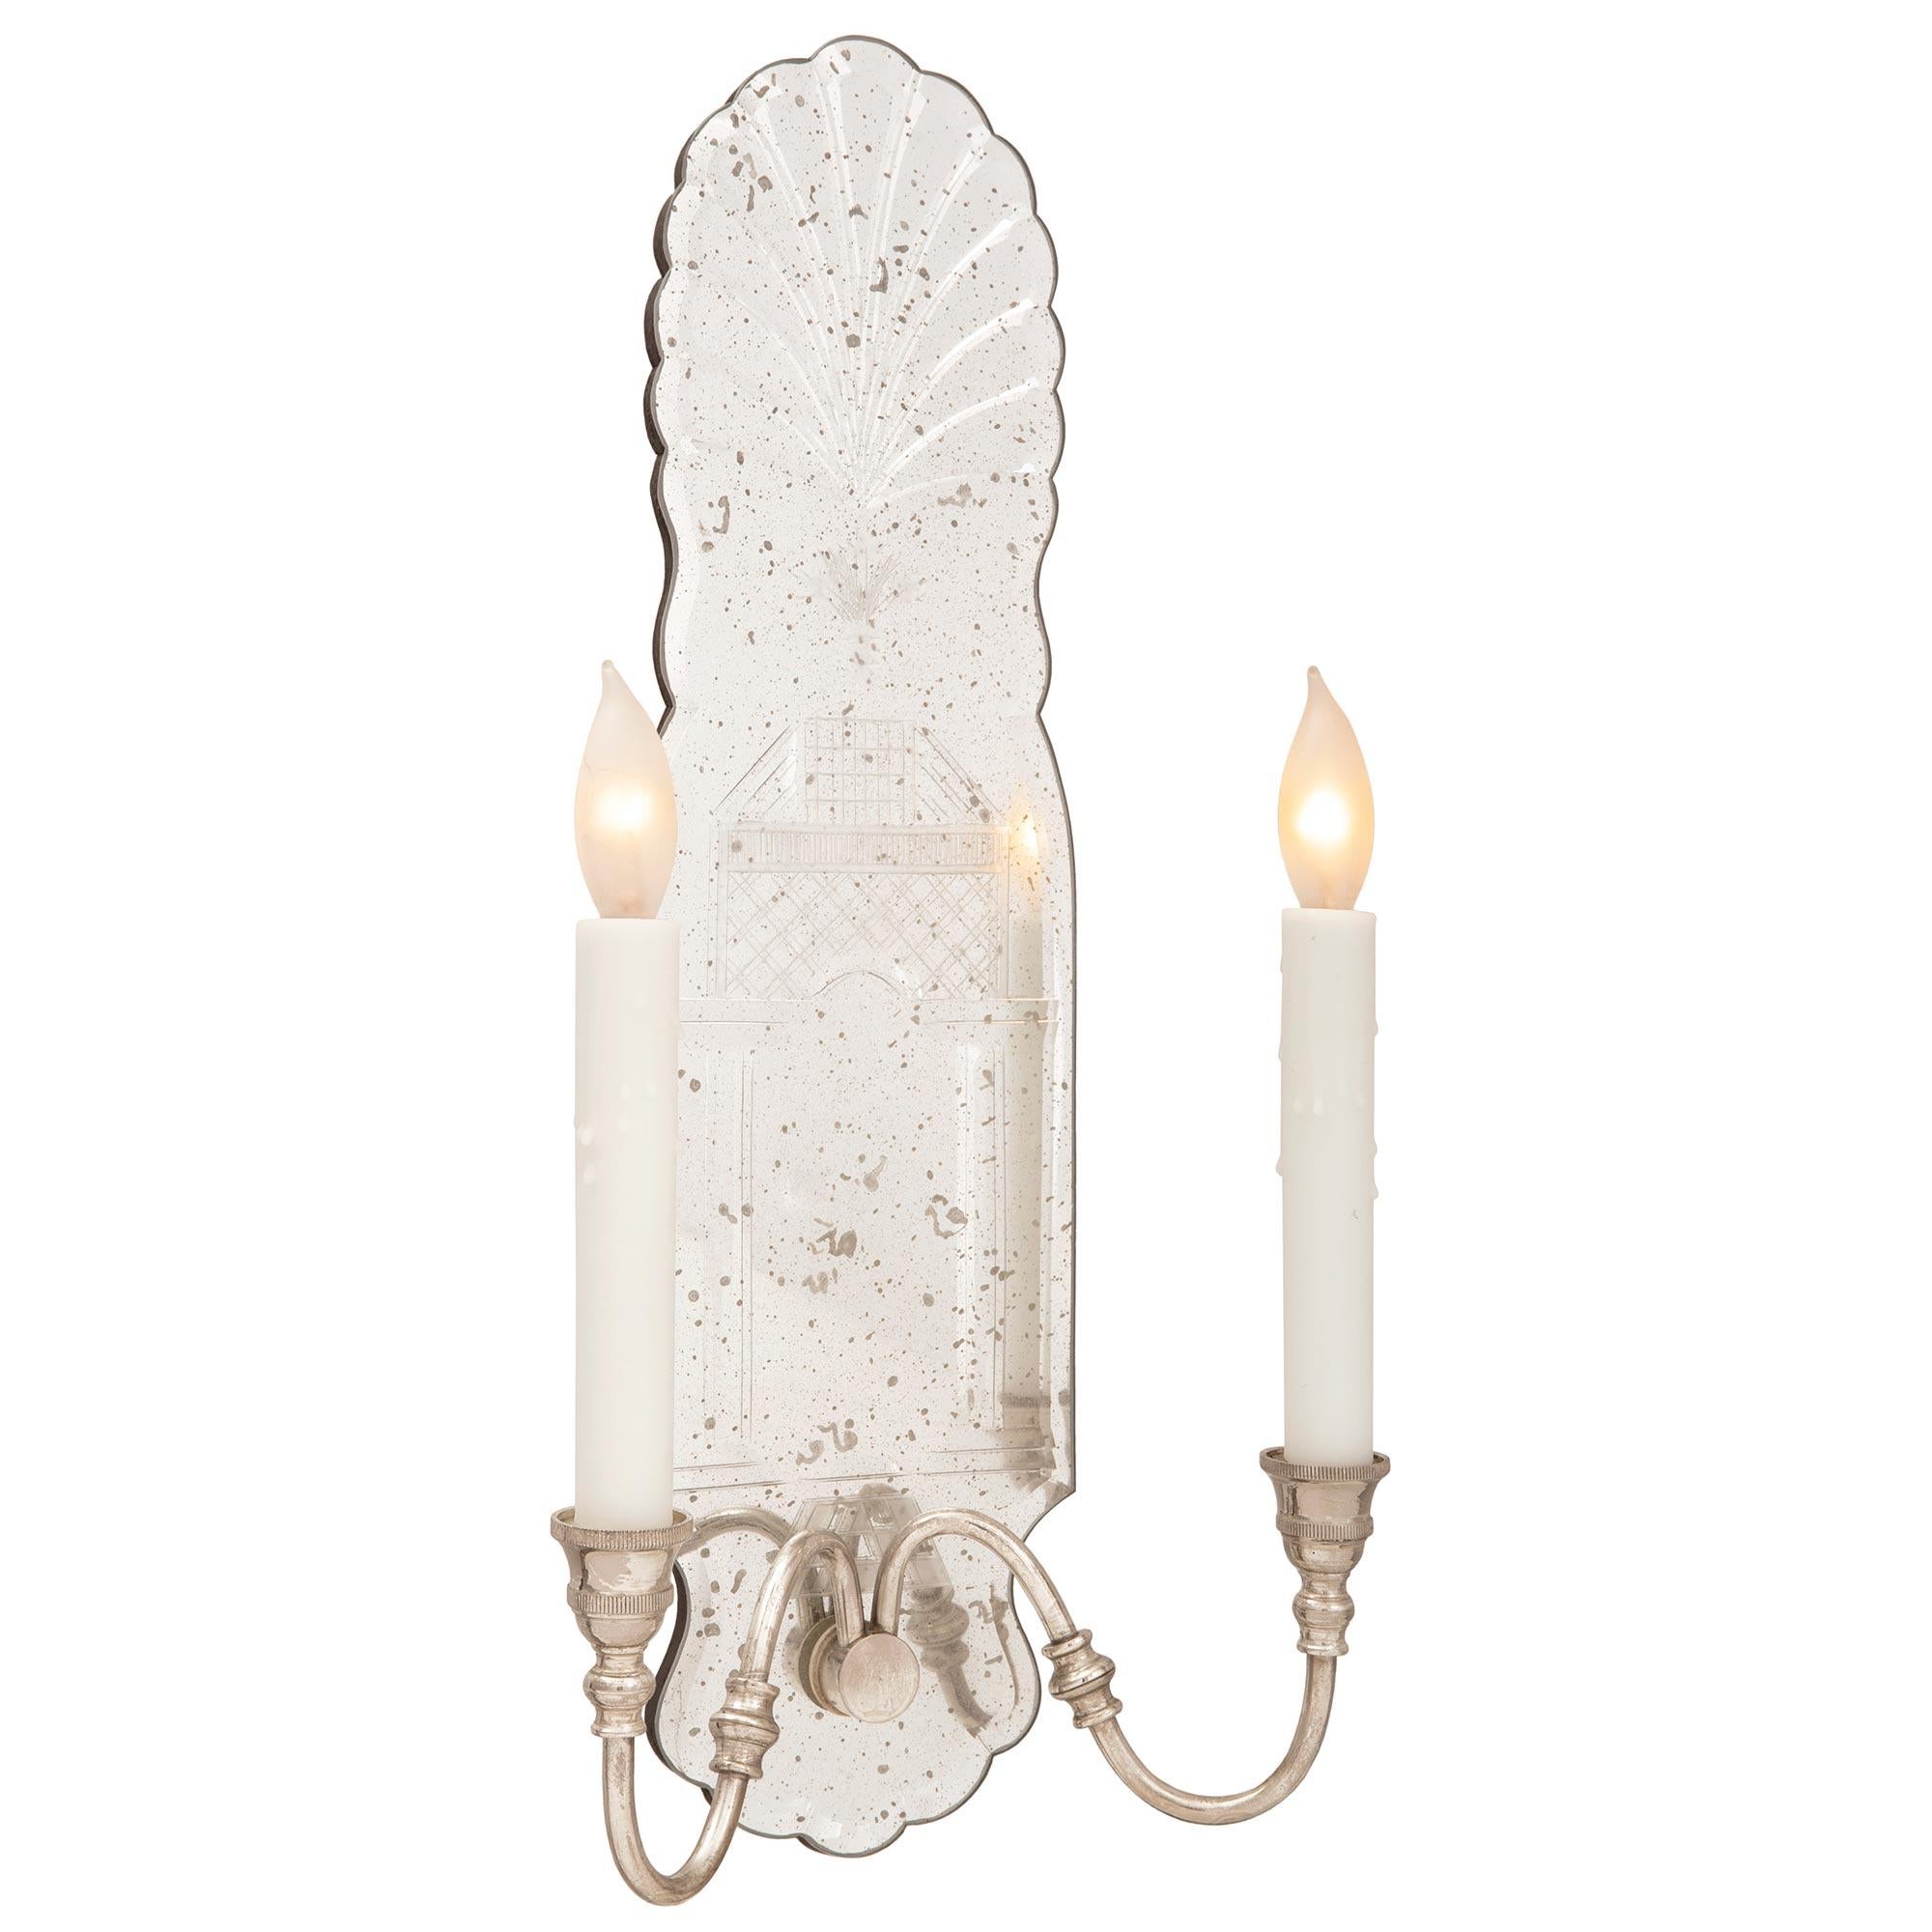 A decorative pair of Italian 20th century Venetian st. silvered bronze and etched glass sconces. Each sconce displays two S scrolled electrified arms ending with a mottled candle cups and two reeded bands. The scalloped shaped etched mirror